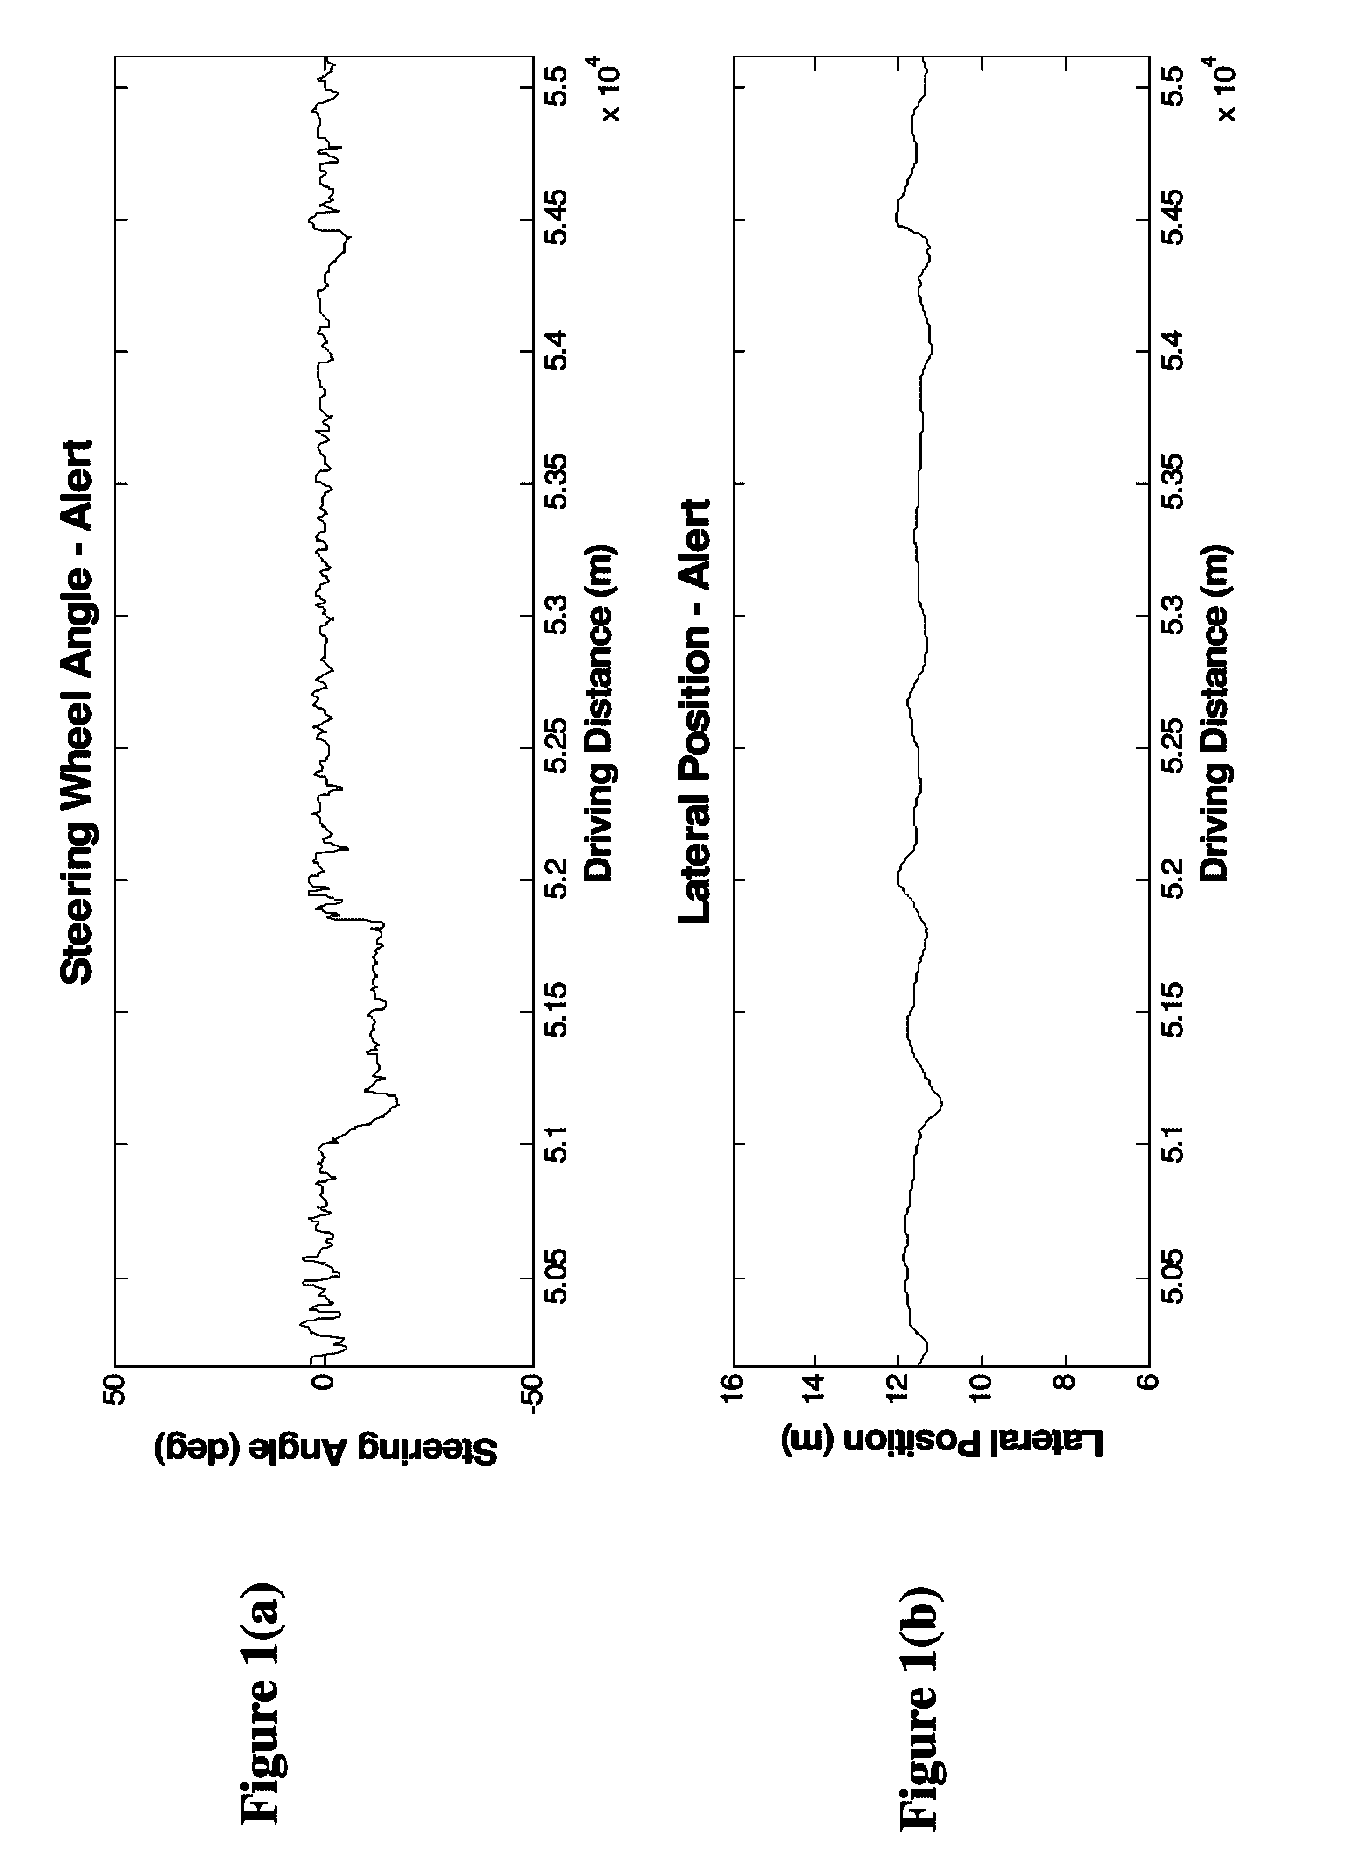 Unobtrusive driver drowsiness detection system and method